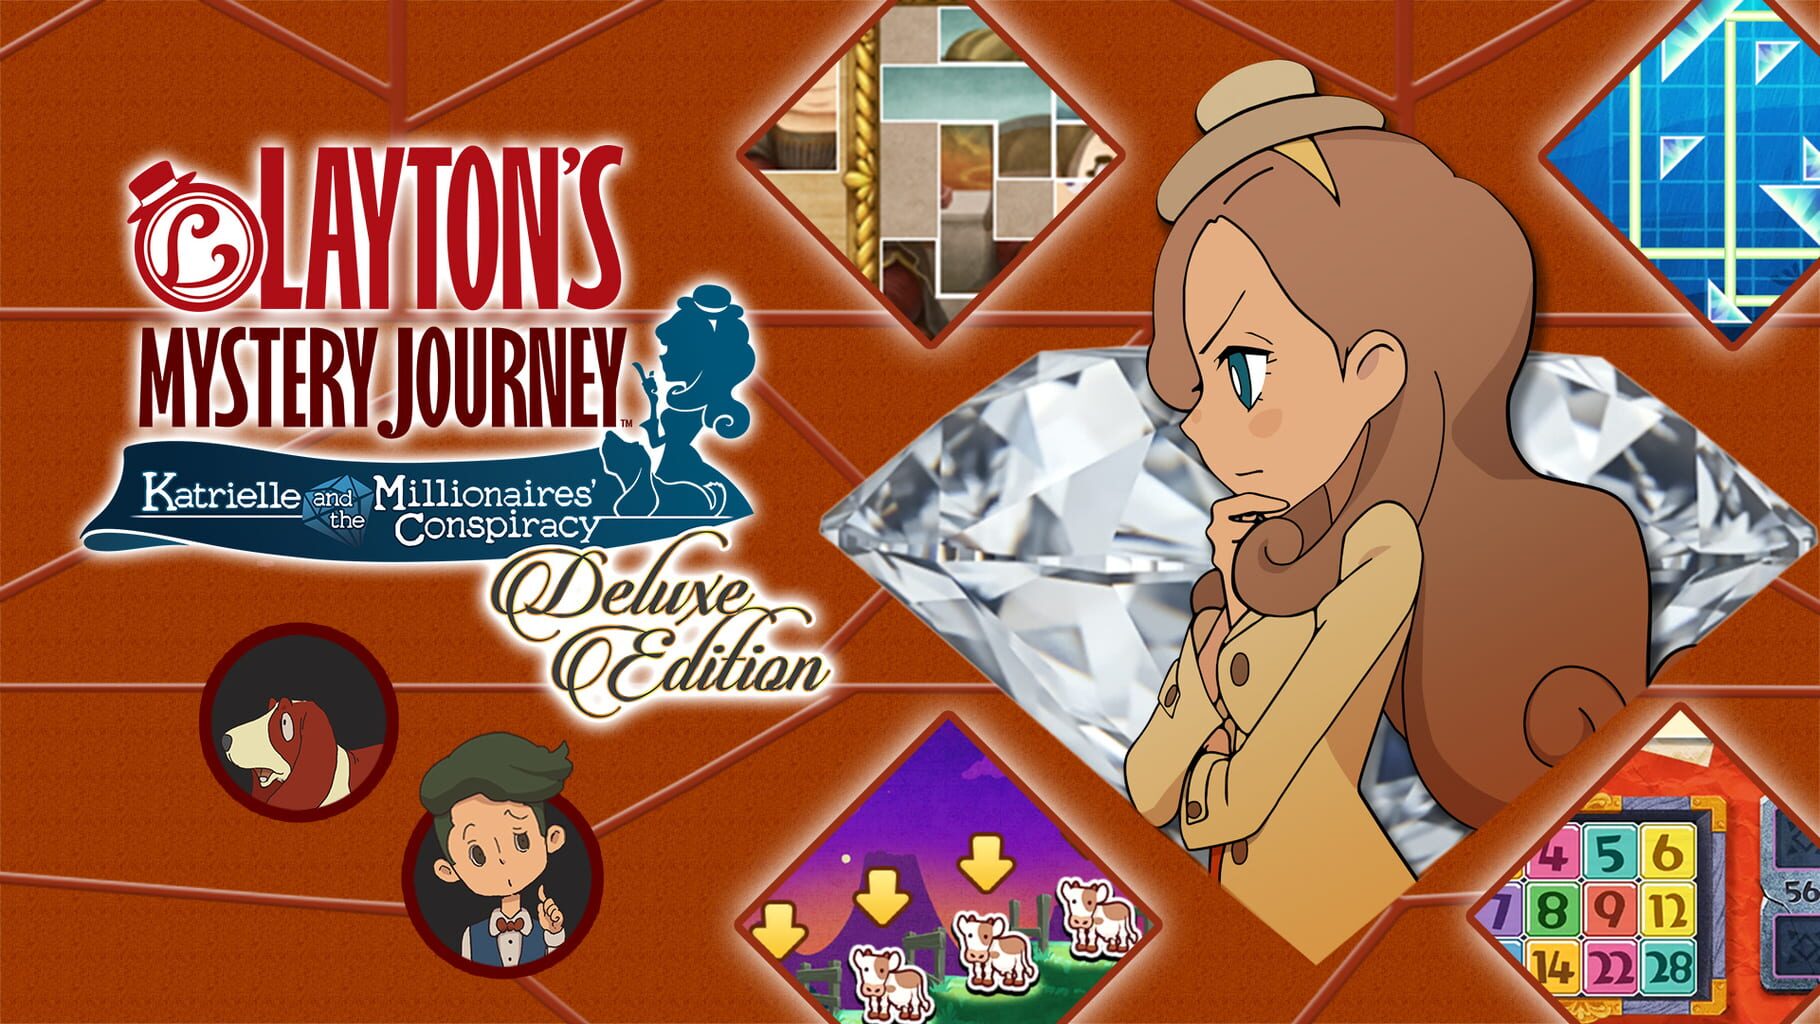 Layton's Mystery Journey: Katrielle and the Millionaires' Conspiracy - Deluxe Edition artwork